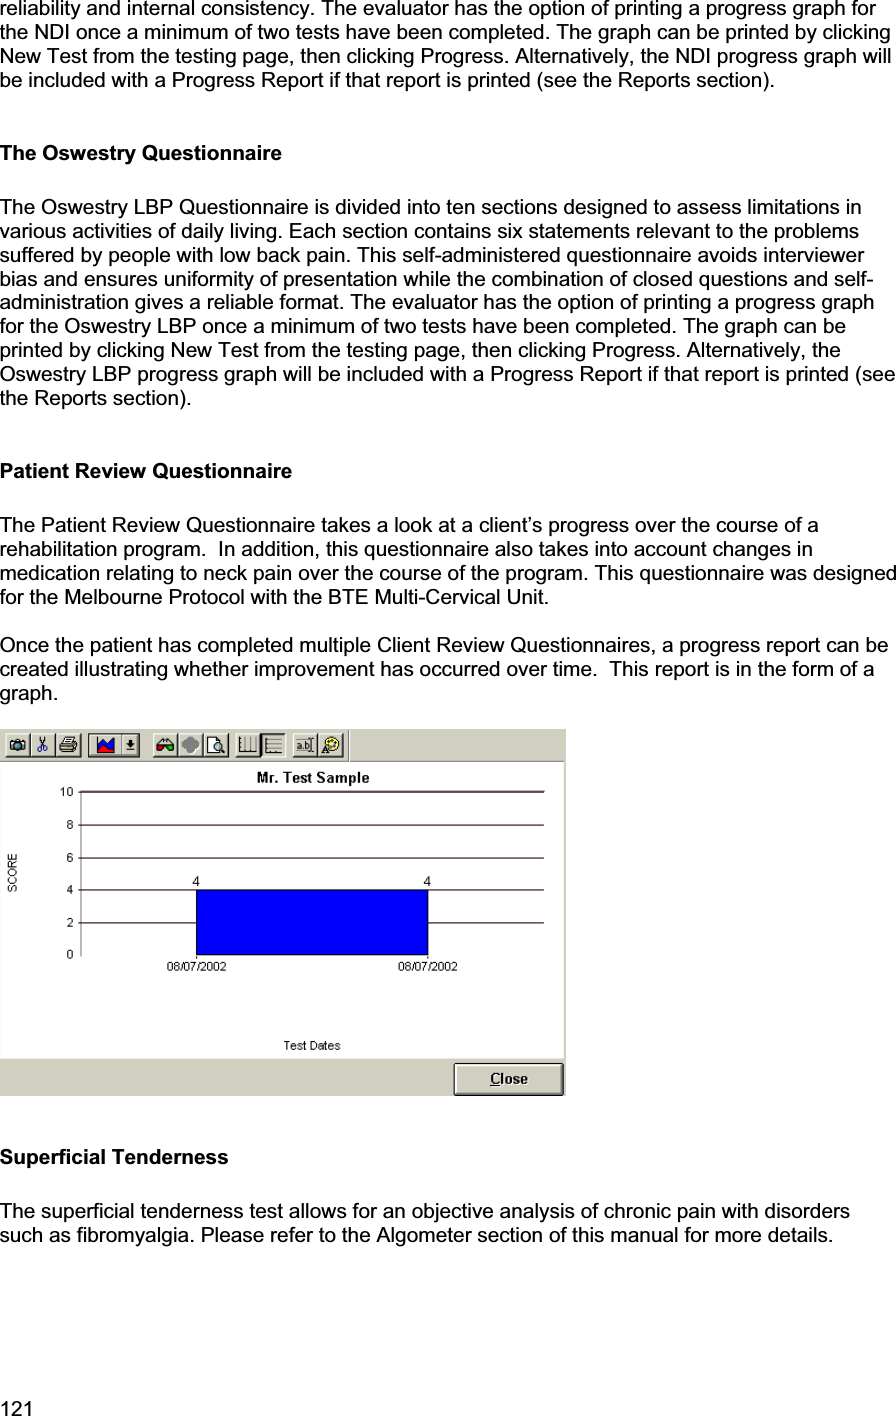 121     reliability and internal consistency. The evaluator has the option of printing a progress graph for the NDI once a minimum of two tests have been completed. The graph can be printed by clicking New Test from the testing page, then clicking Progress. Alternatively, the NDI progress graph will be included with a Progress Report if that report is printed (see the Reports section). The Oswestry Questionnaire The Oswestry LBP Questionnaire is divided into ten sections designed to assess limitations in various activities of daily living. Each section contains six statements relevant to the problems suffered by people with low back pain. This self-administered questionnaire avoids interviewer bias and ensures uniformity of presentation while the combination of closed questions and self-administration gives a reliable format. The evaluator has the option of printing a progress graph for the Oswestry LBP once a minimum of two tests have been completed. The graph can be printed by clicking New Test from the testing page, then clicking Progress. Alternatively, the Oswestry LBP progress graph will be included with a Progress Report if that report is printed (see the Reports section). Patient Review Questionnaire The Patient Review Questionnaire takes a look at a client’s progress over the course of a rehabilitation program.  In addition, this questionnaire also takes into account changes in medication relating to neck pain over the course of the program. This questionnaire was designed for the Melbourne Protocol with the BTE Multi-Cervical Unit. Once the patient has completed multiple Client Review Questionnaires, a progress report can be created illustrating whether improvement has occurred over time.  This report is in the form of a graph. Superficial Tenderness The superficial tenderness test allows for an objective analysis of chronic pain with disorders such as fibromyalgia. Please refer to the Algometer section of this manual for more details. 